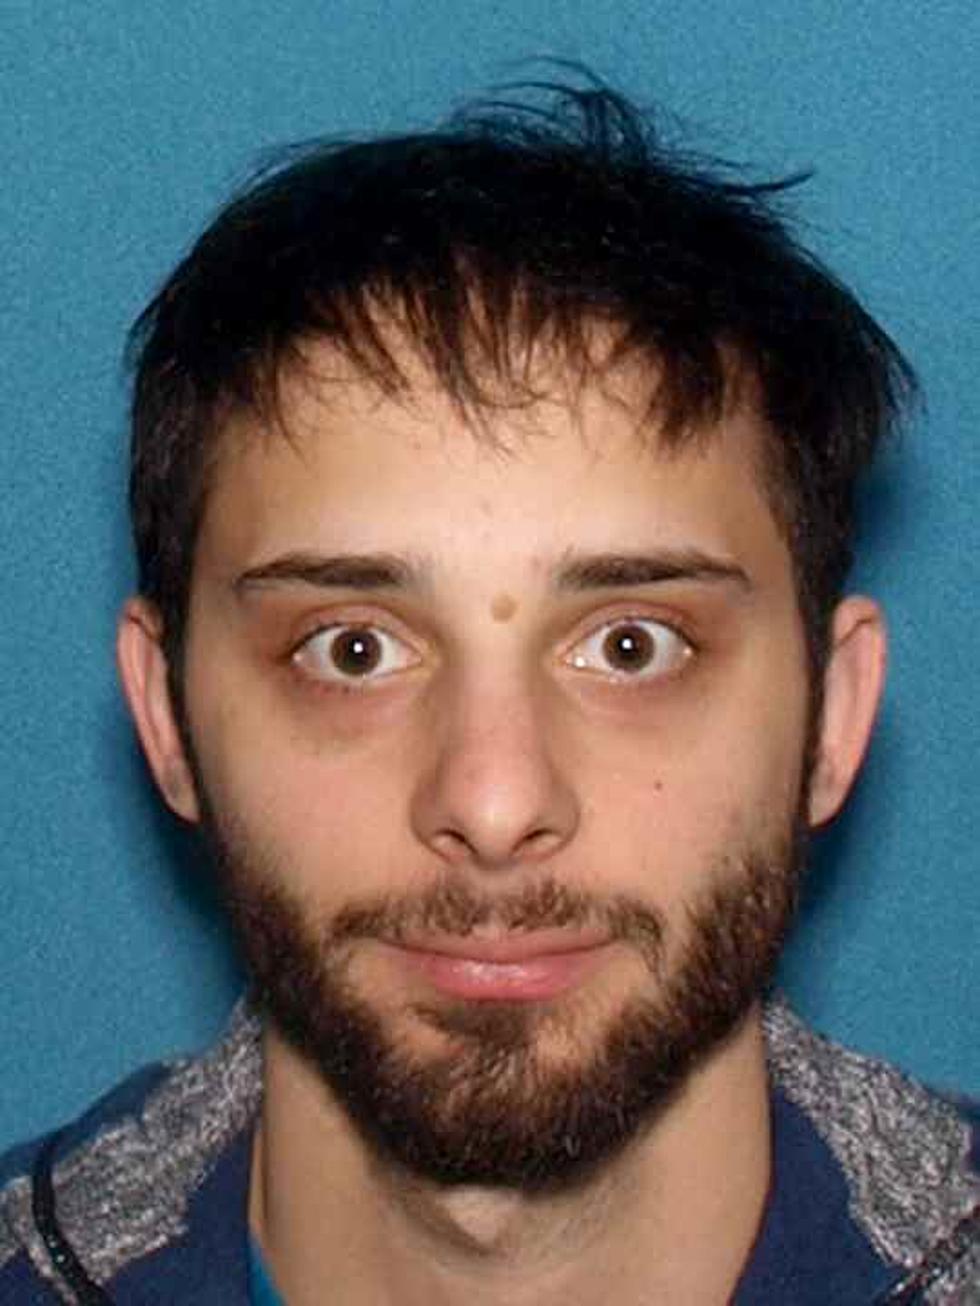 WANTED: Armed and Dangerous fugitive for attempted murder in New Jersey